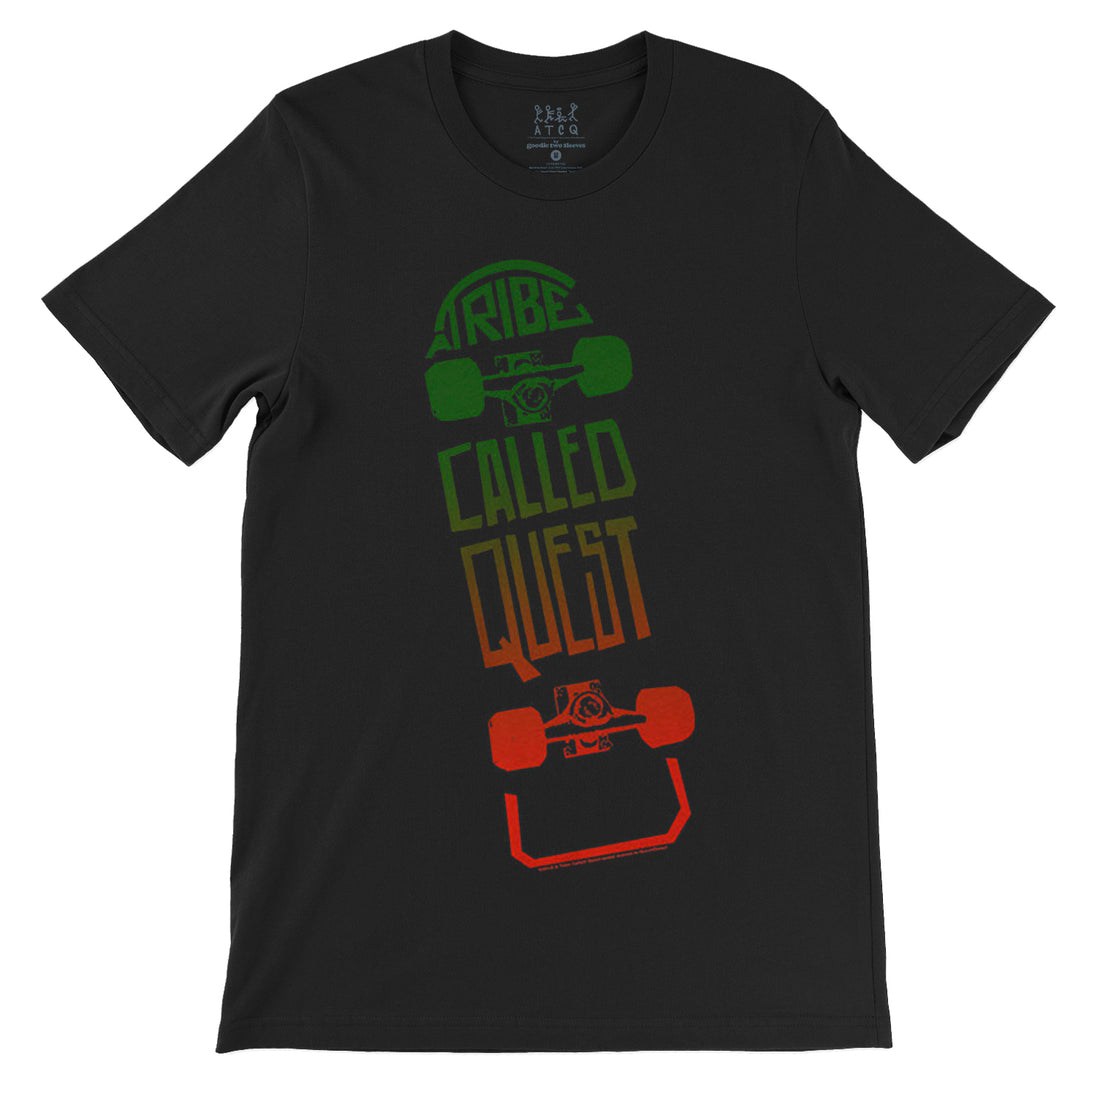 A Tribe Called Quest Skate T-Shirt